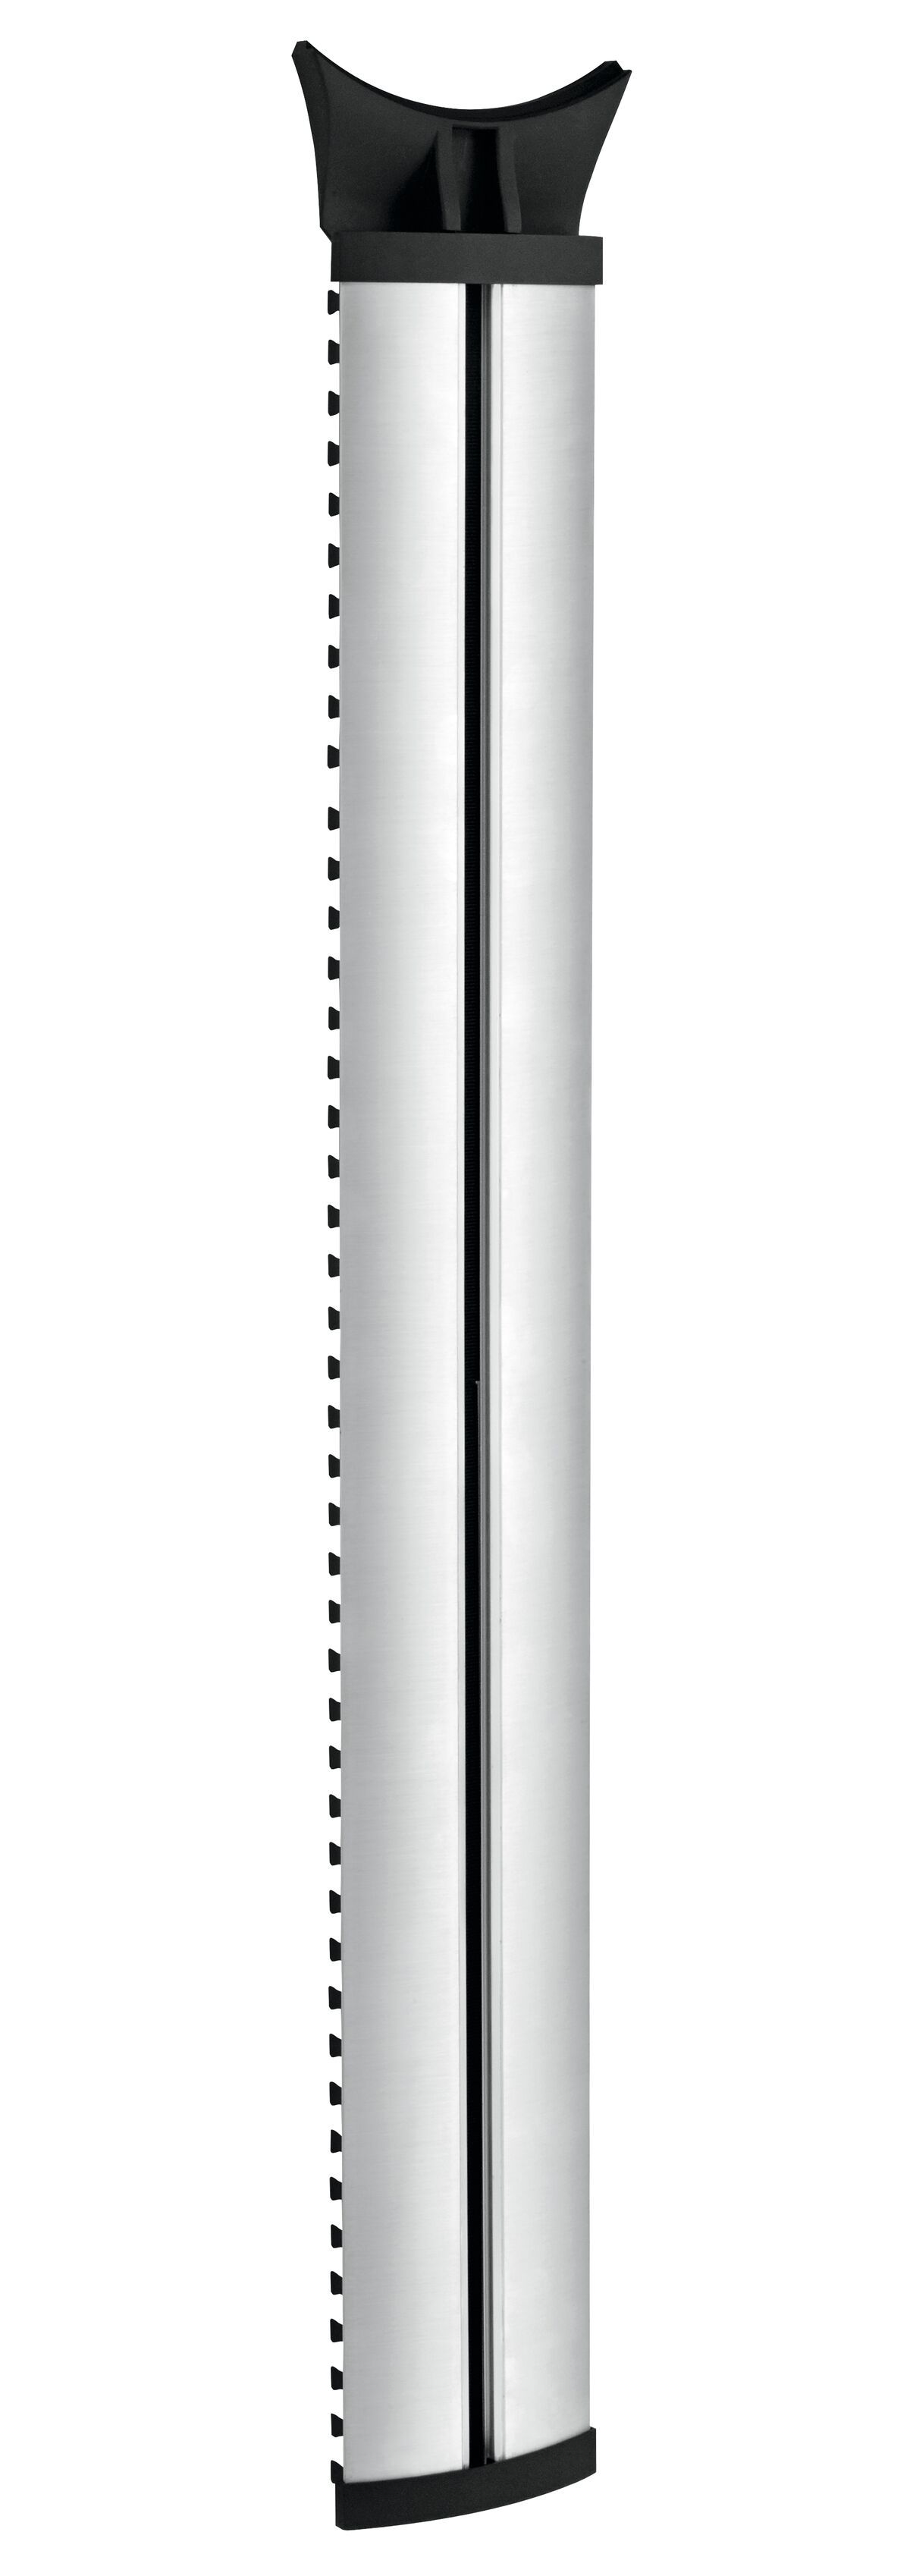 Vogel's NEXT 7840 Cable Column - Max. number of cables to hold: Up to 10 cables - Length: Product